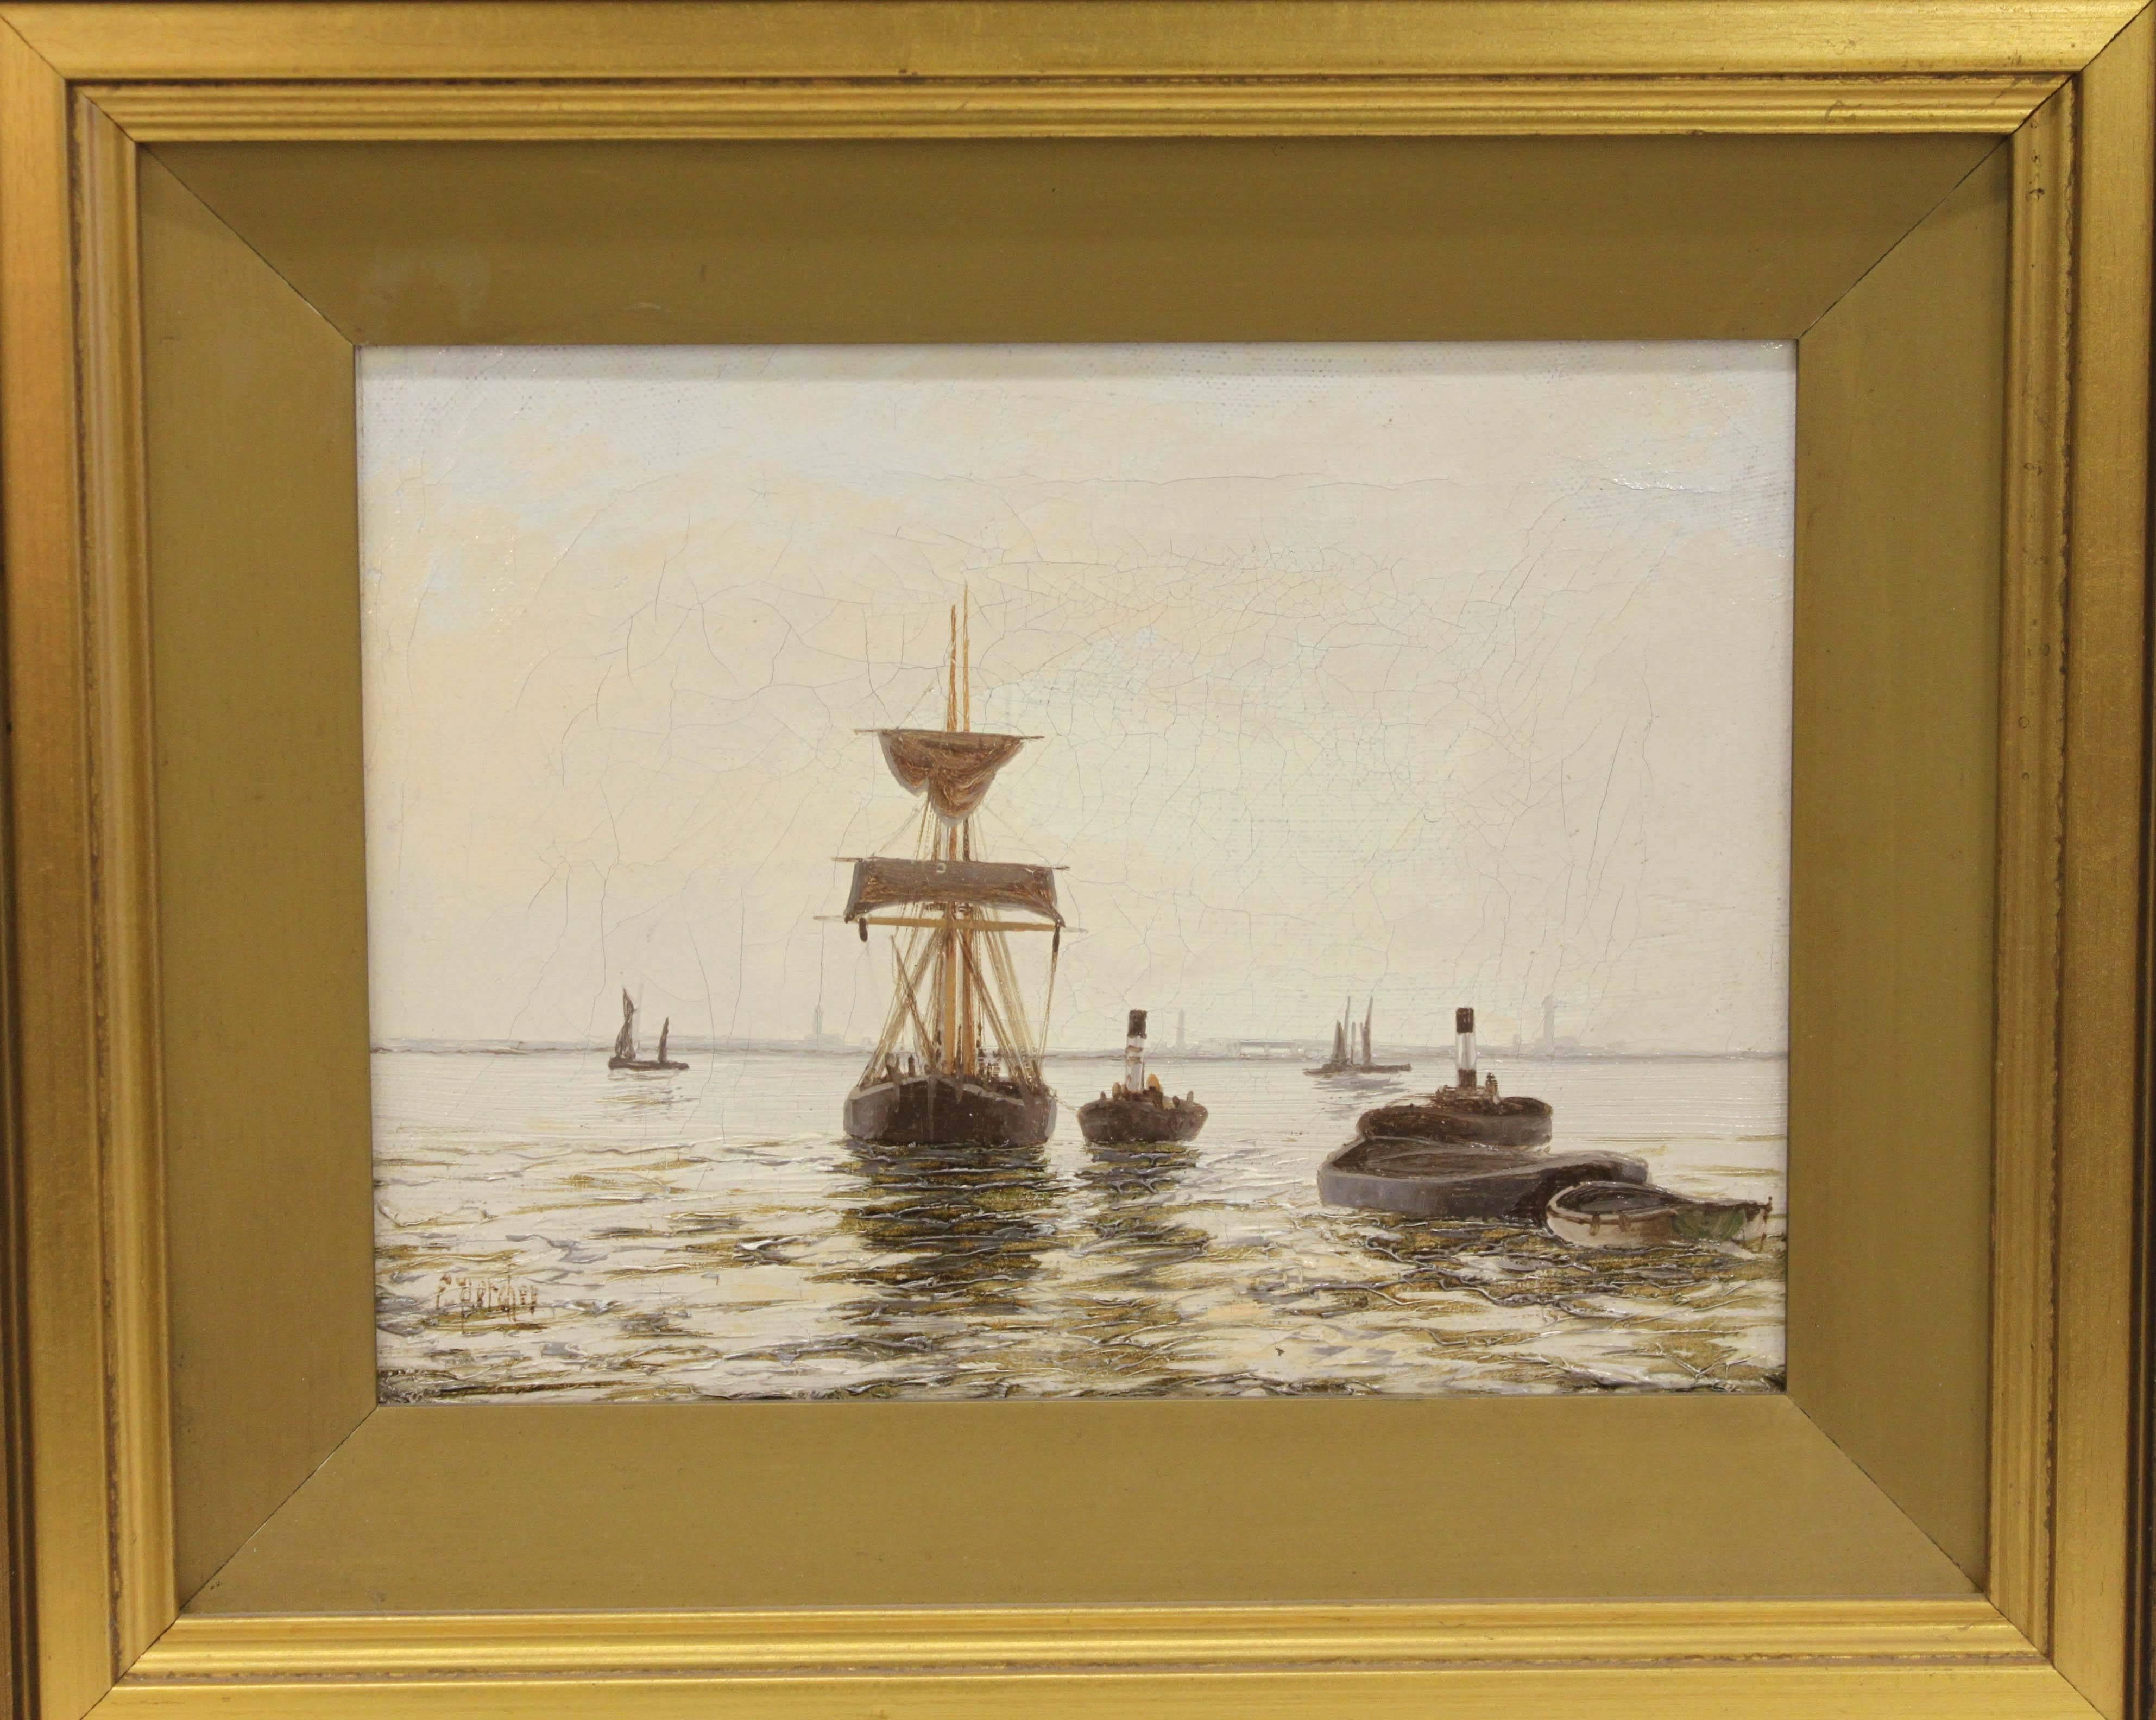 Shipping in an Estuary - Painting by Edward Henry Eugene Fletcher